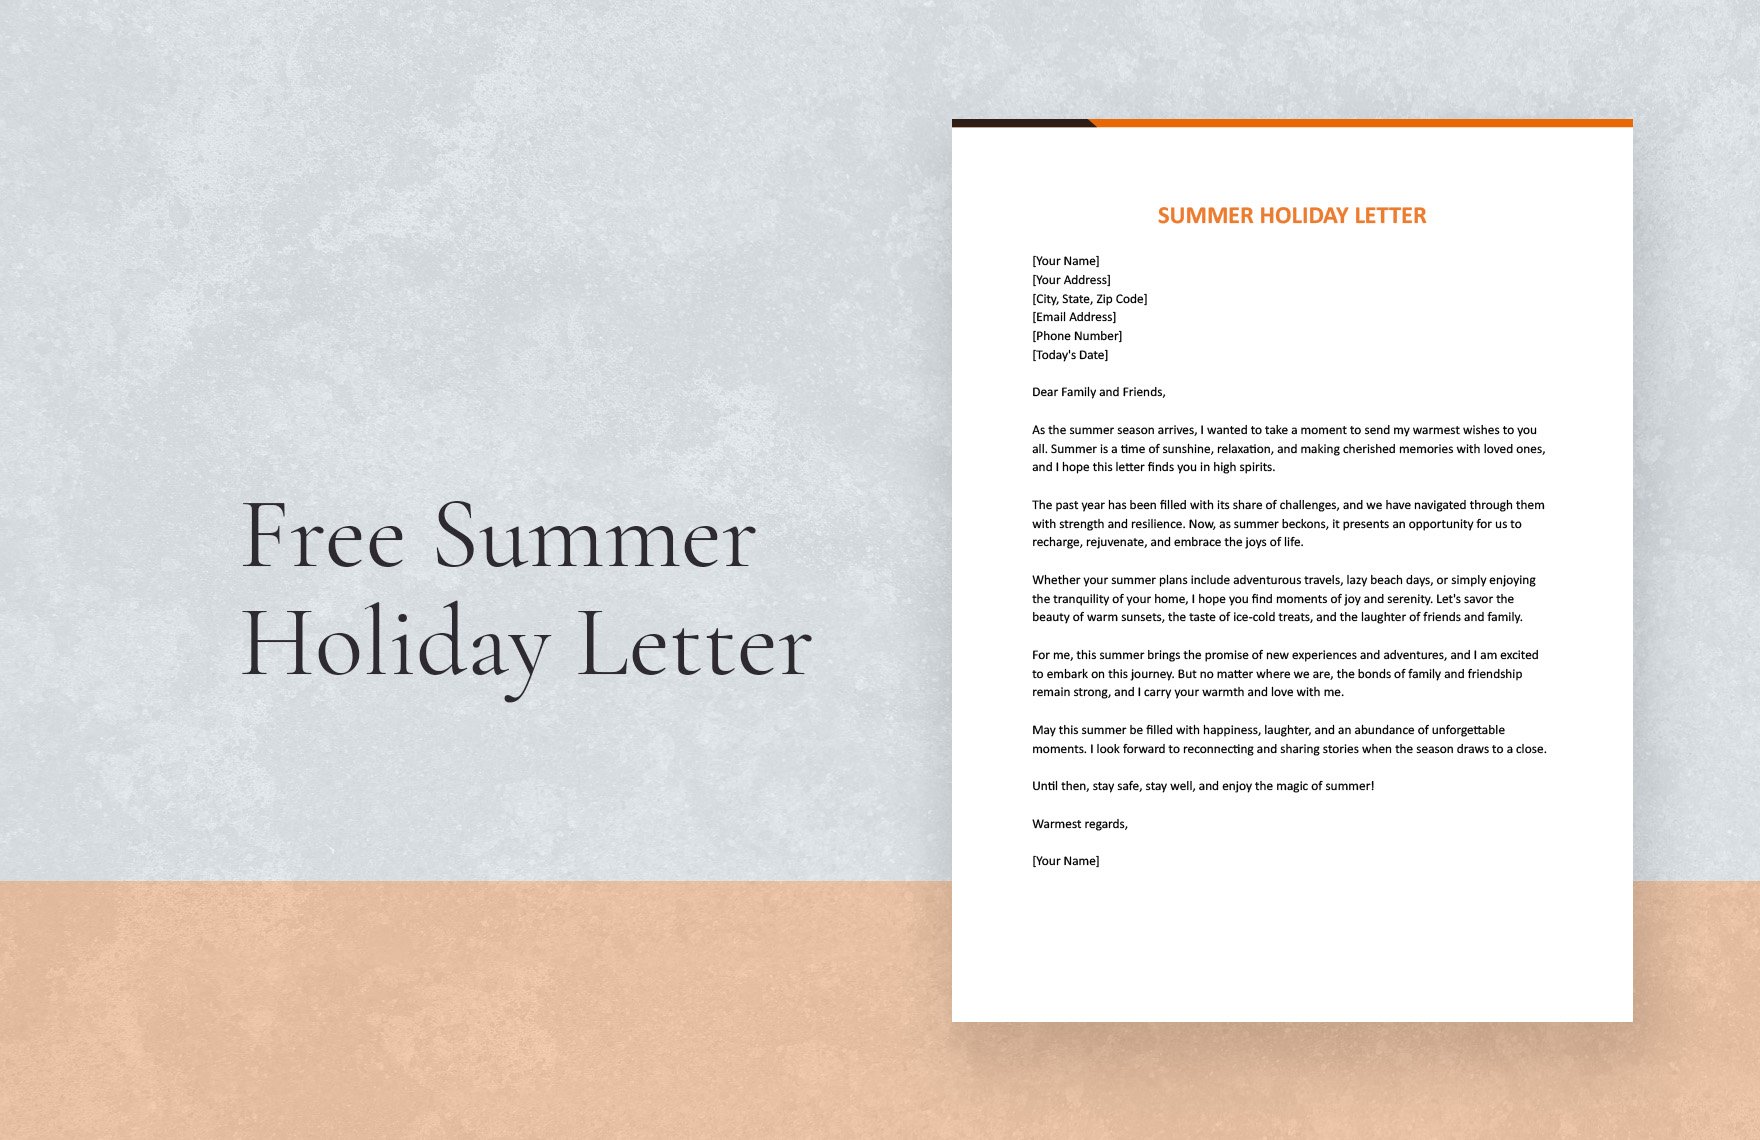 Summer Holiday Letter in Word, Google Docs